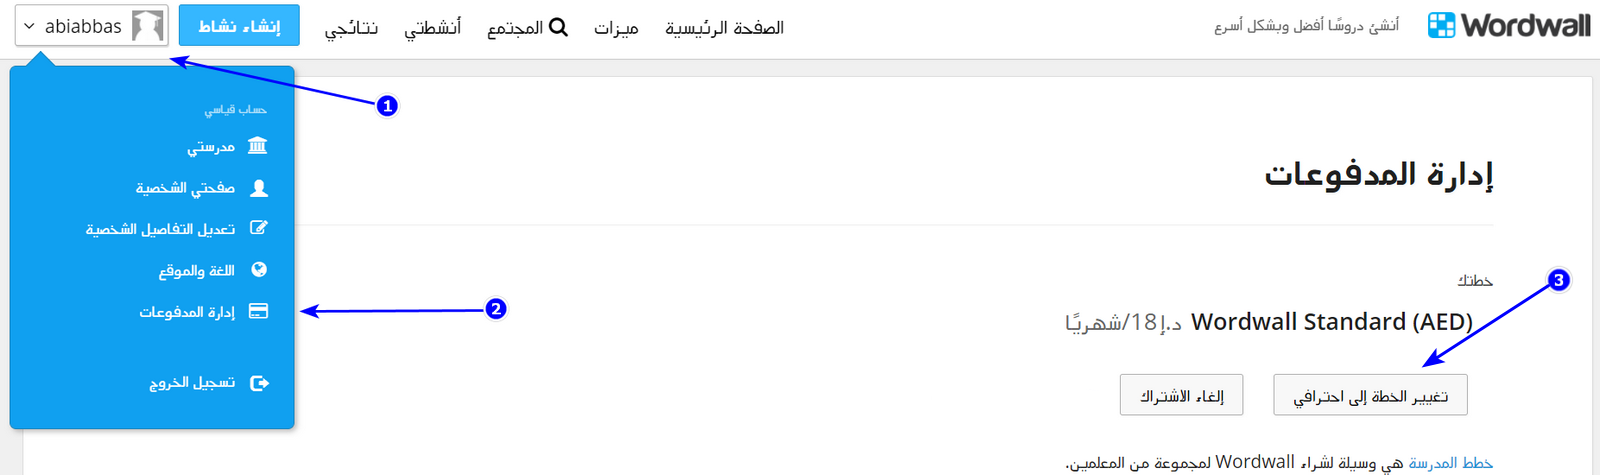 How_do_I_upgrade_downgrade_my_subscription_-_Arabic_1.png